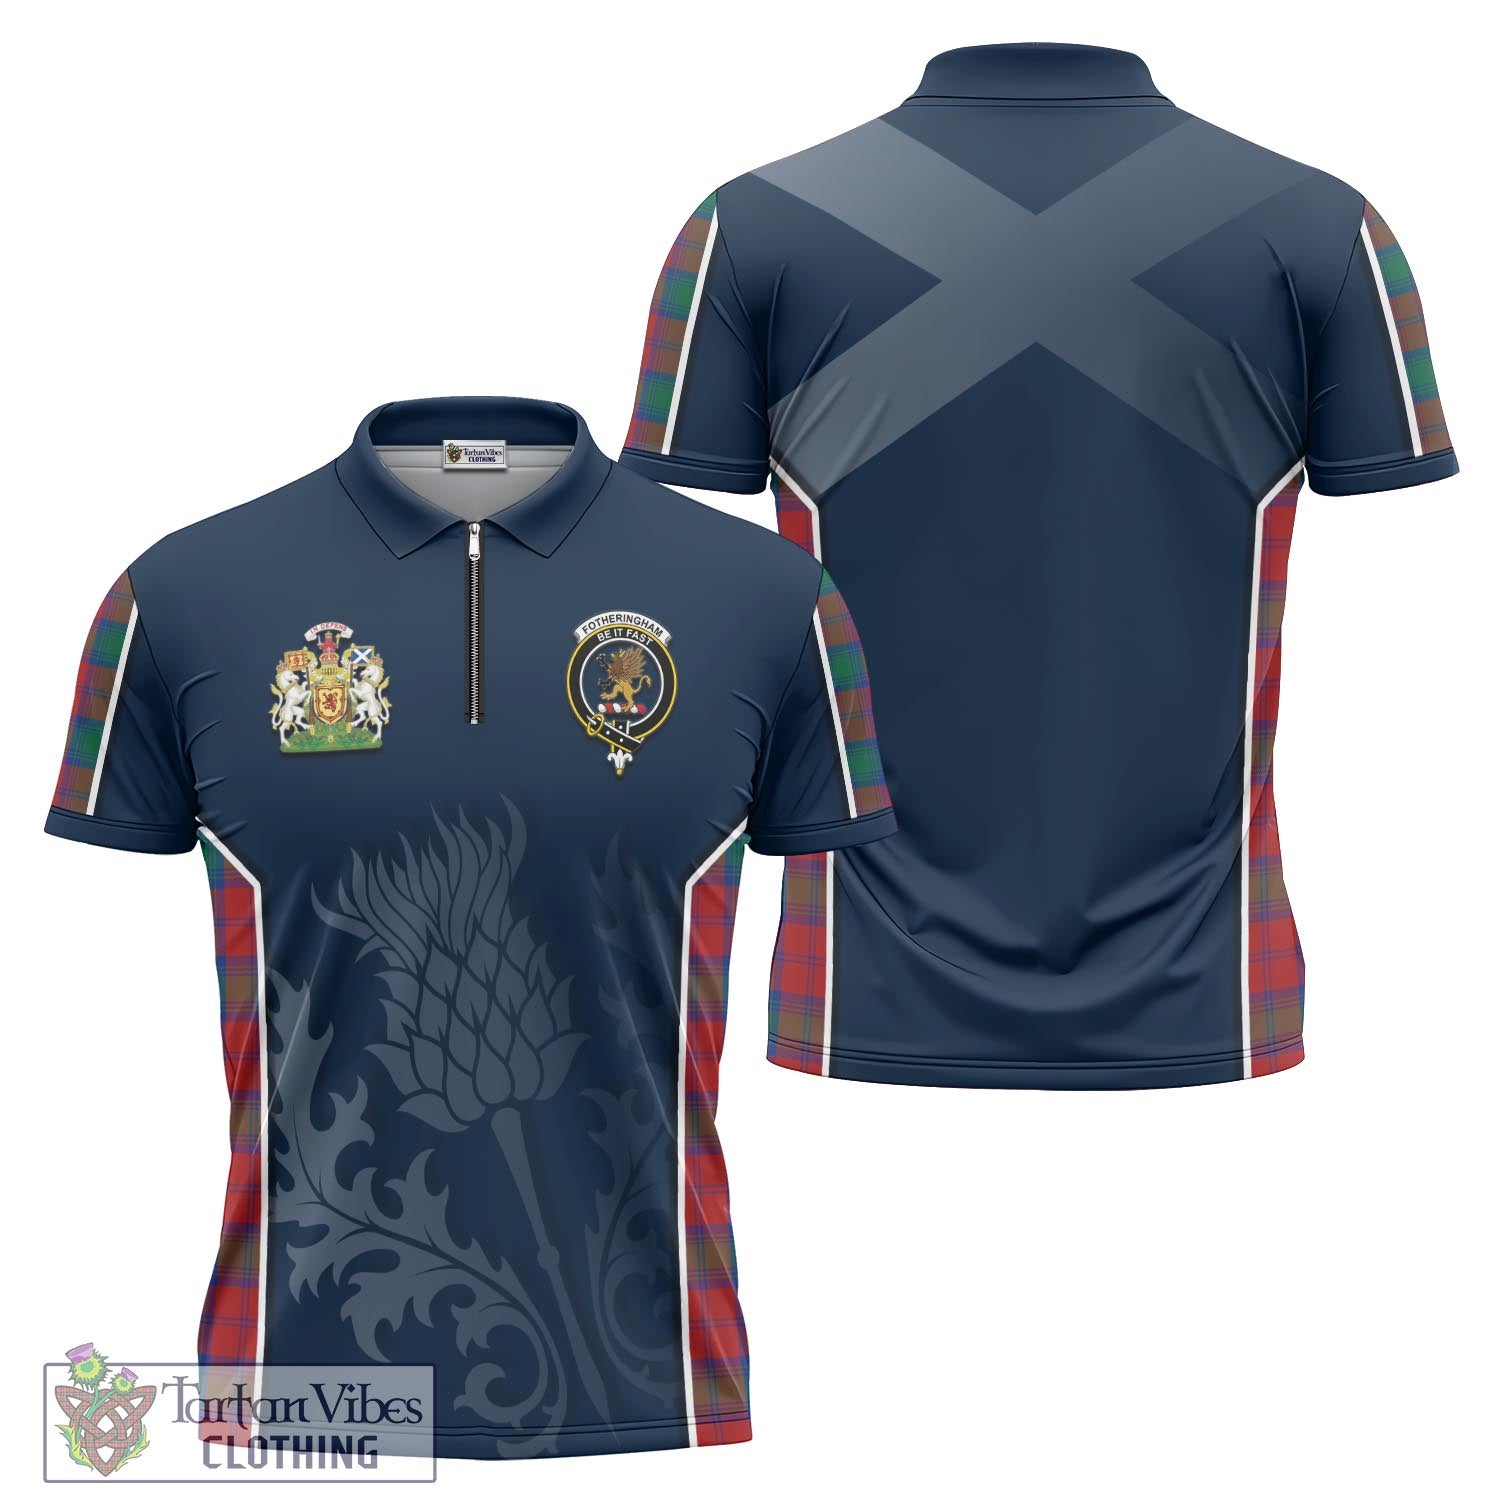 Tartan Vibes Clothing Fotheringham Modern Tartan Zipper Polo Shirt with Family Crest and Scottish Thistle Vibes Sport Style